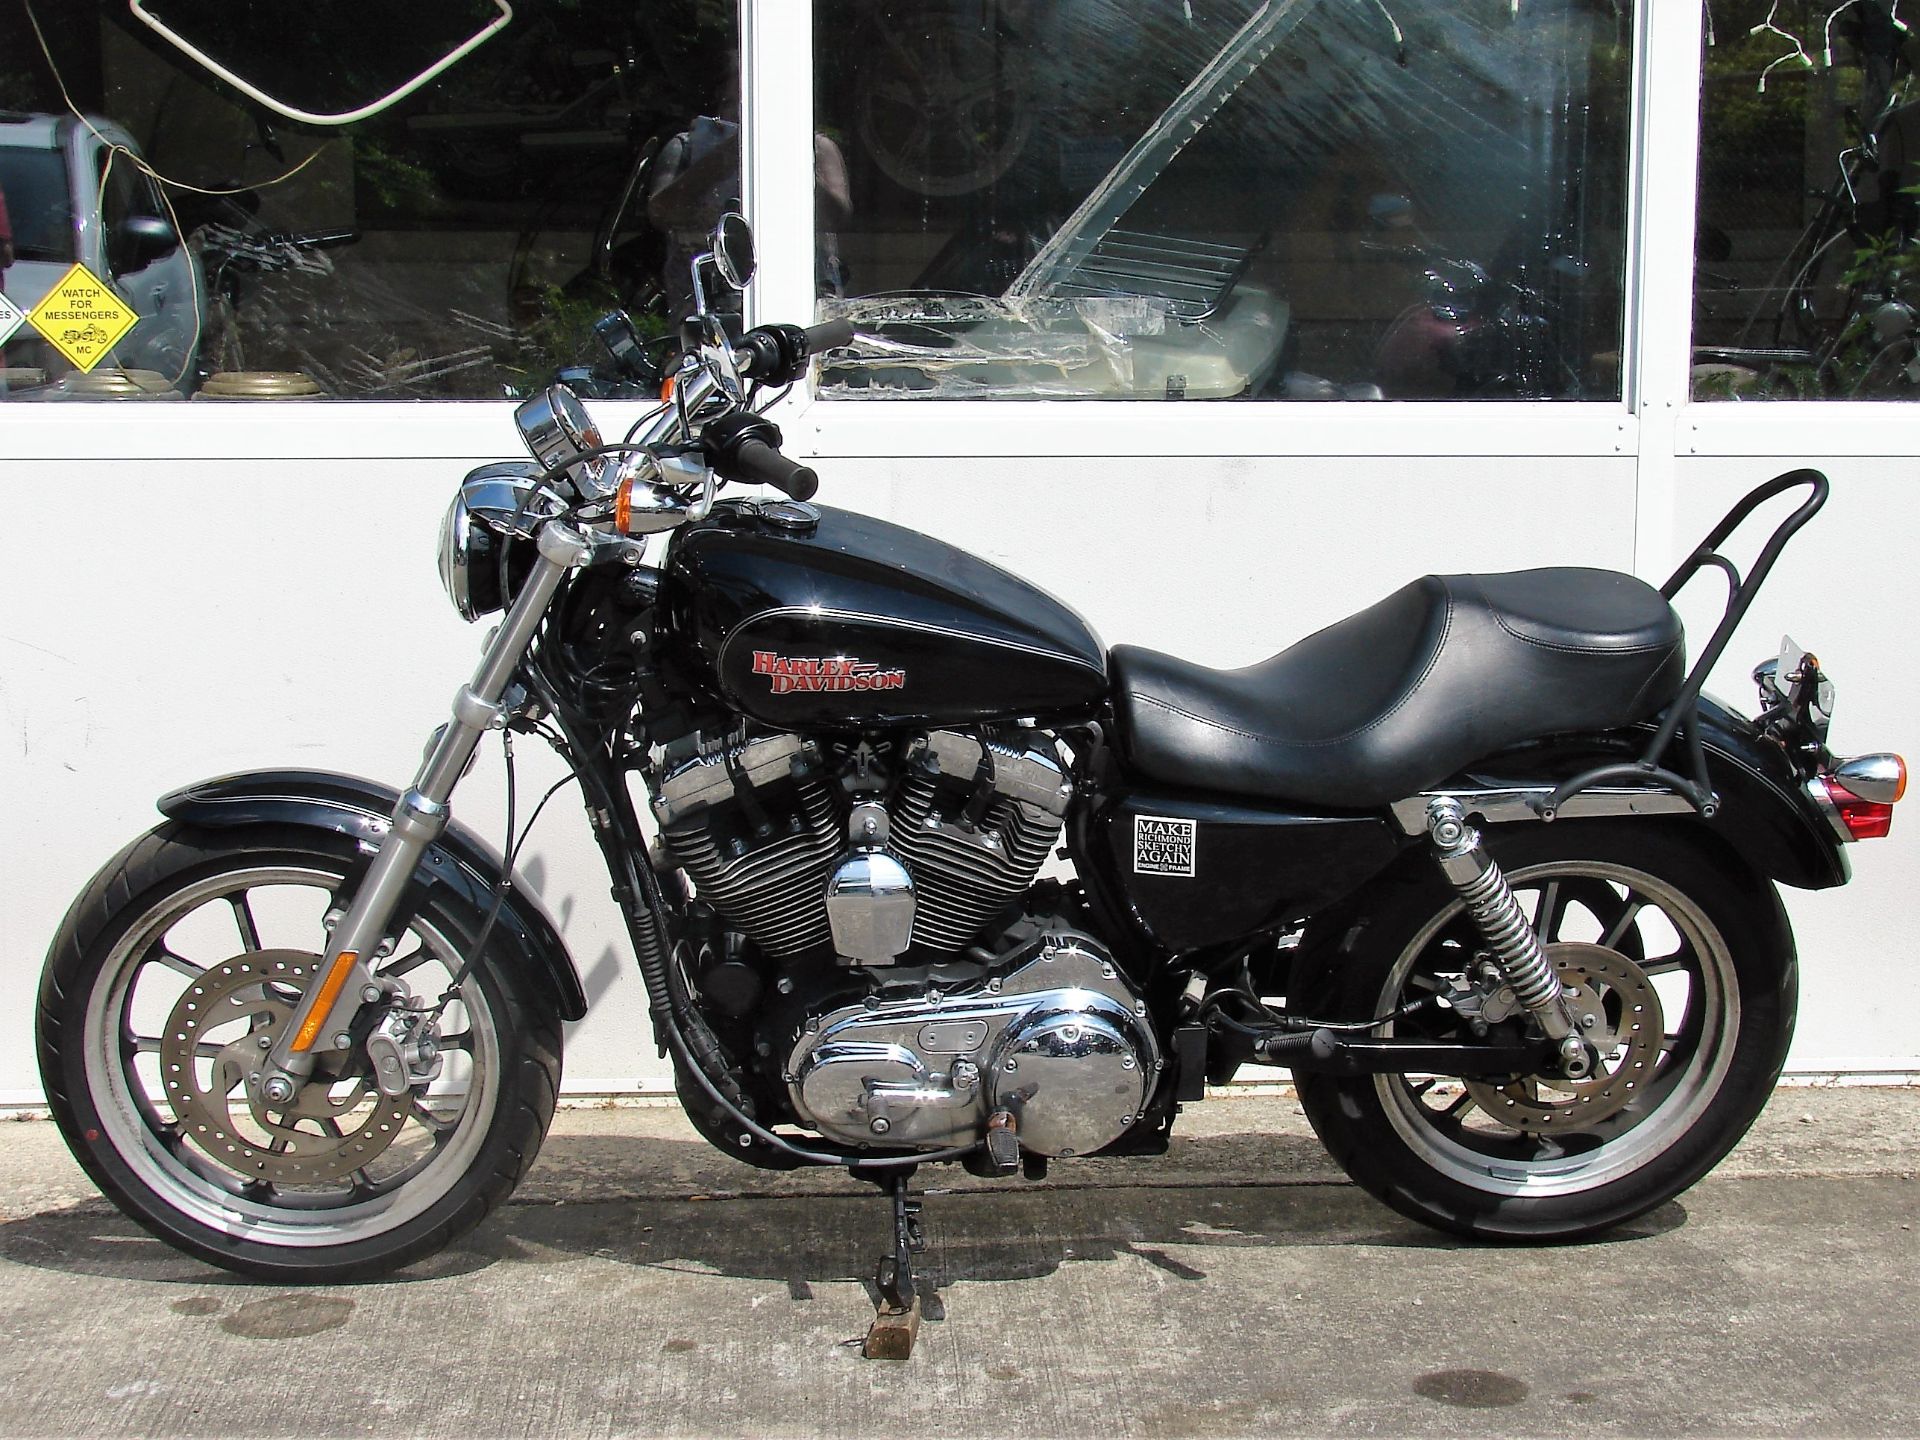 2014 Harley-Davidson XL 1200 T Super Low Sportster in Williamstown, New Jersey - Photo 20